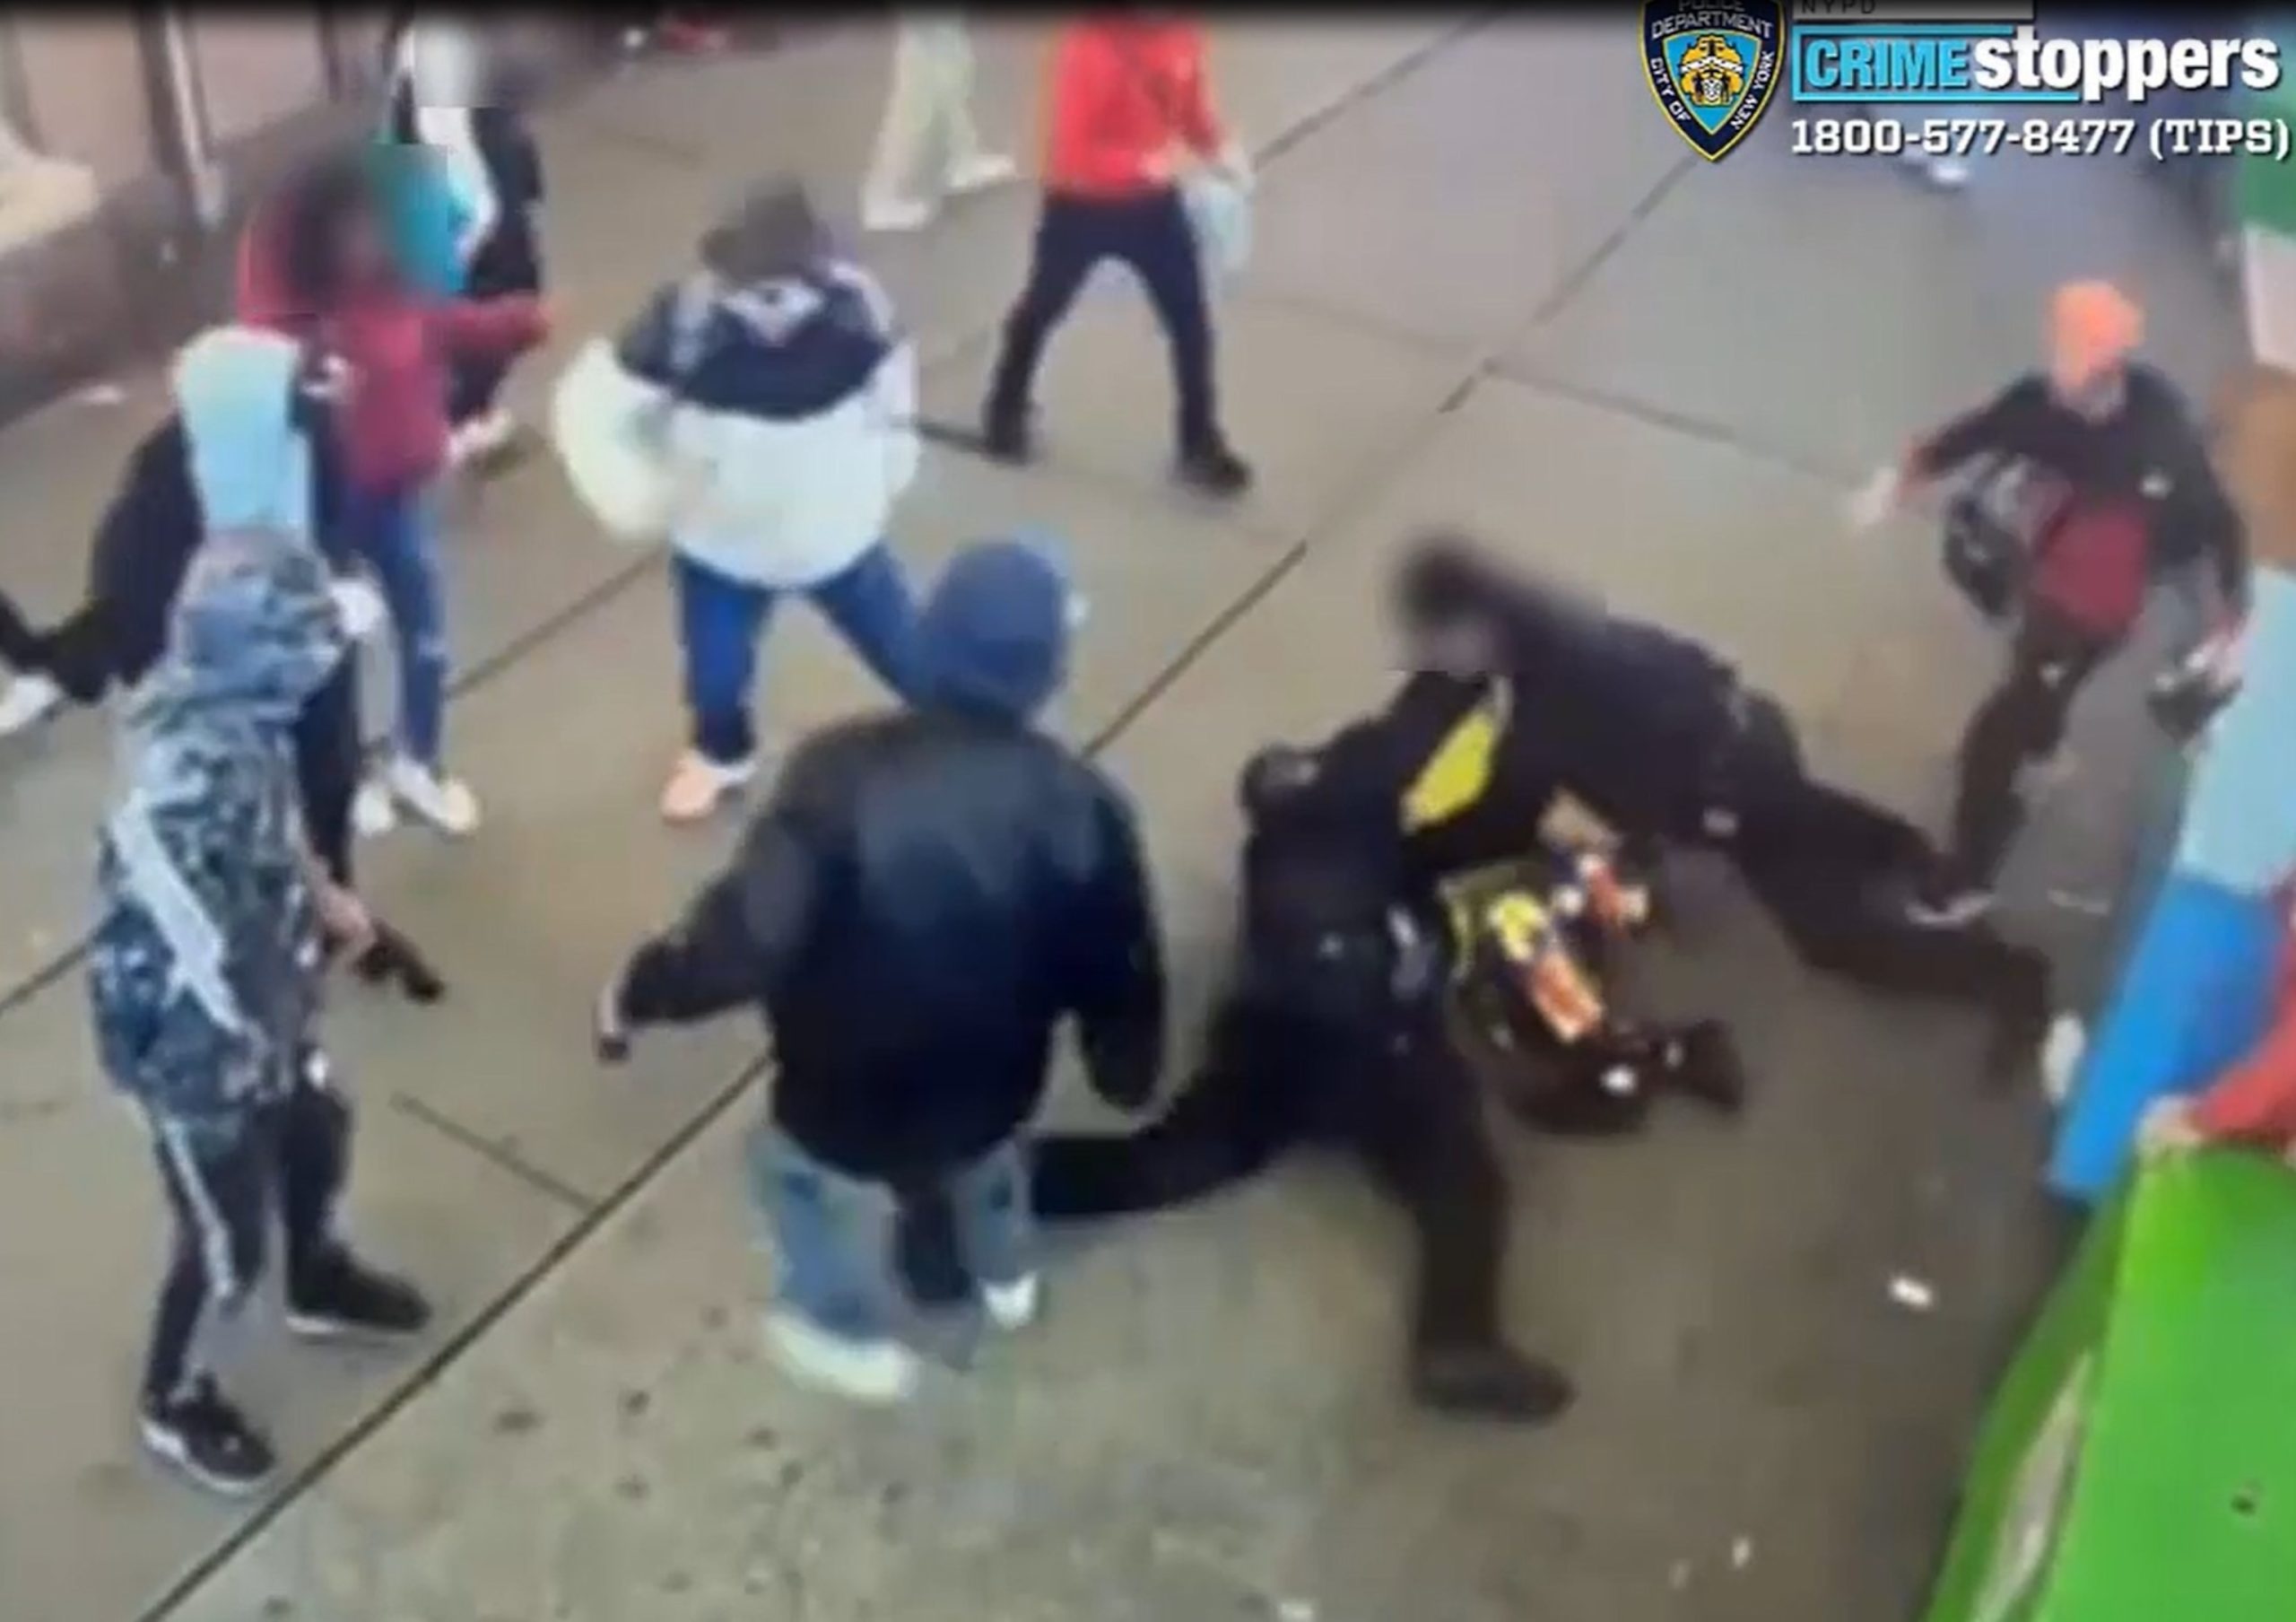 Arrested: 5 Asylum-Seekers Charged with Assault on Police Officers in Times Square